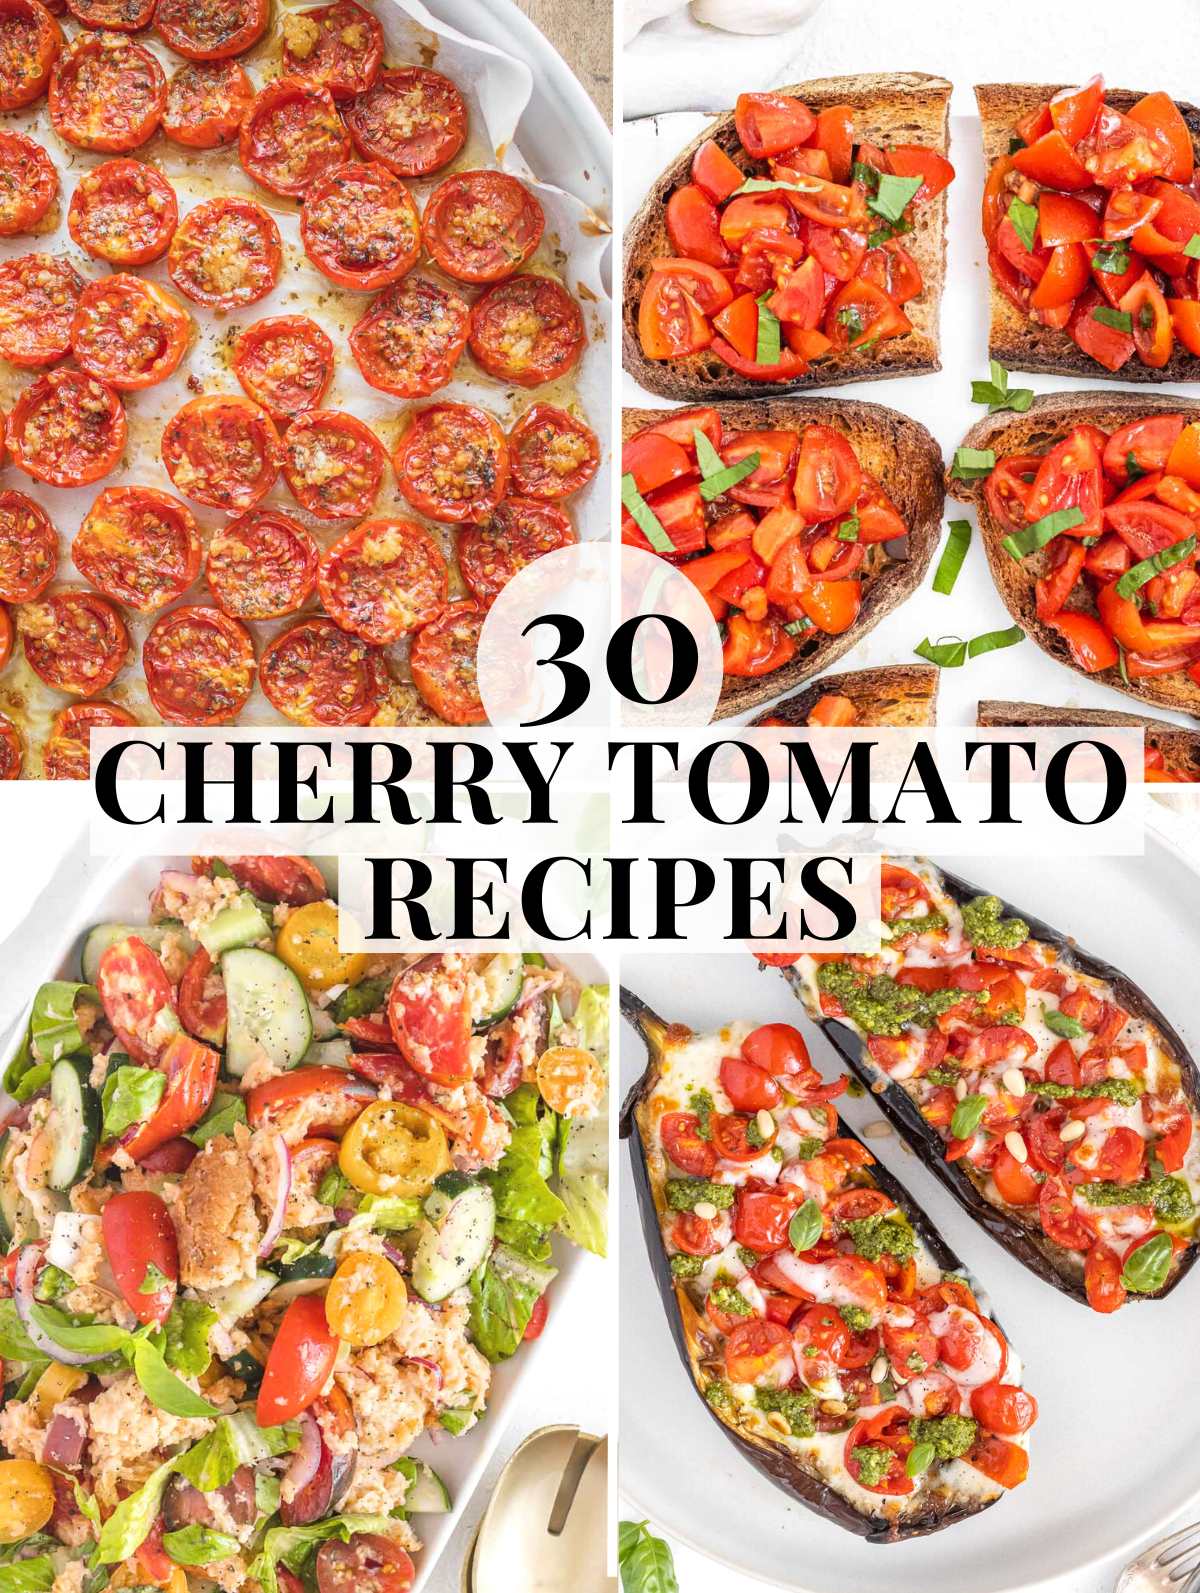 Cherry tomato recipes with appetizers and mains